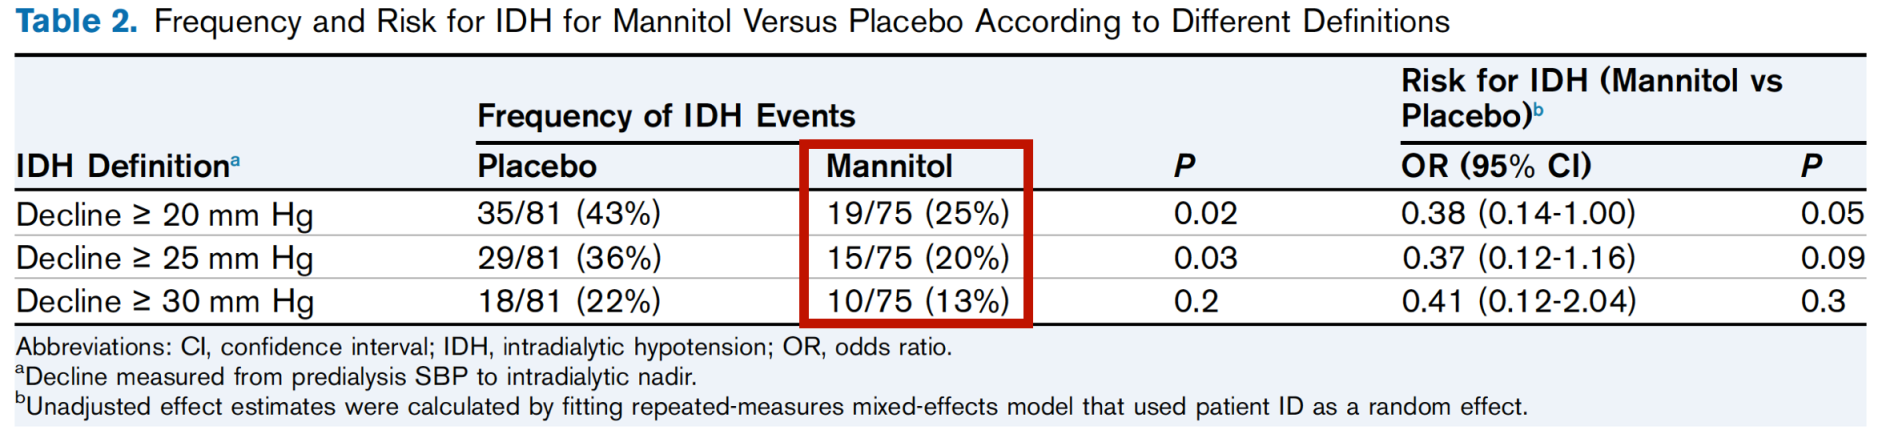 Utility of Hypertonic Mannitol for the Prevention of Intradialytic Hypotension (IDH)